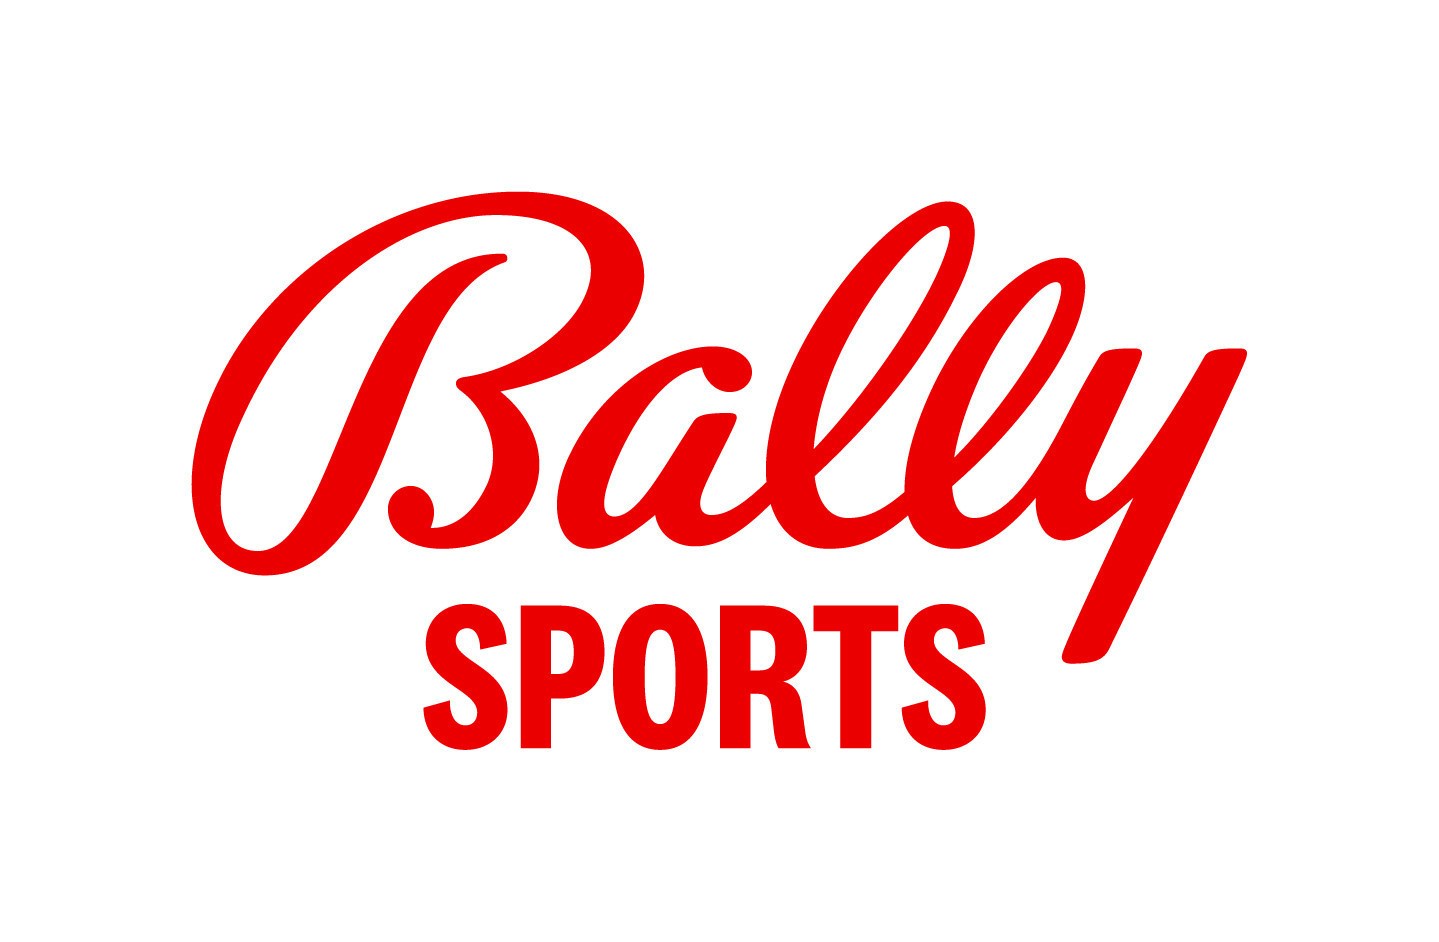 Bally Sports Says The NBA Suns Deal to Stream Games For Free Breaks Bankruptcy Laws